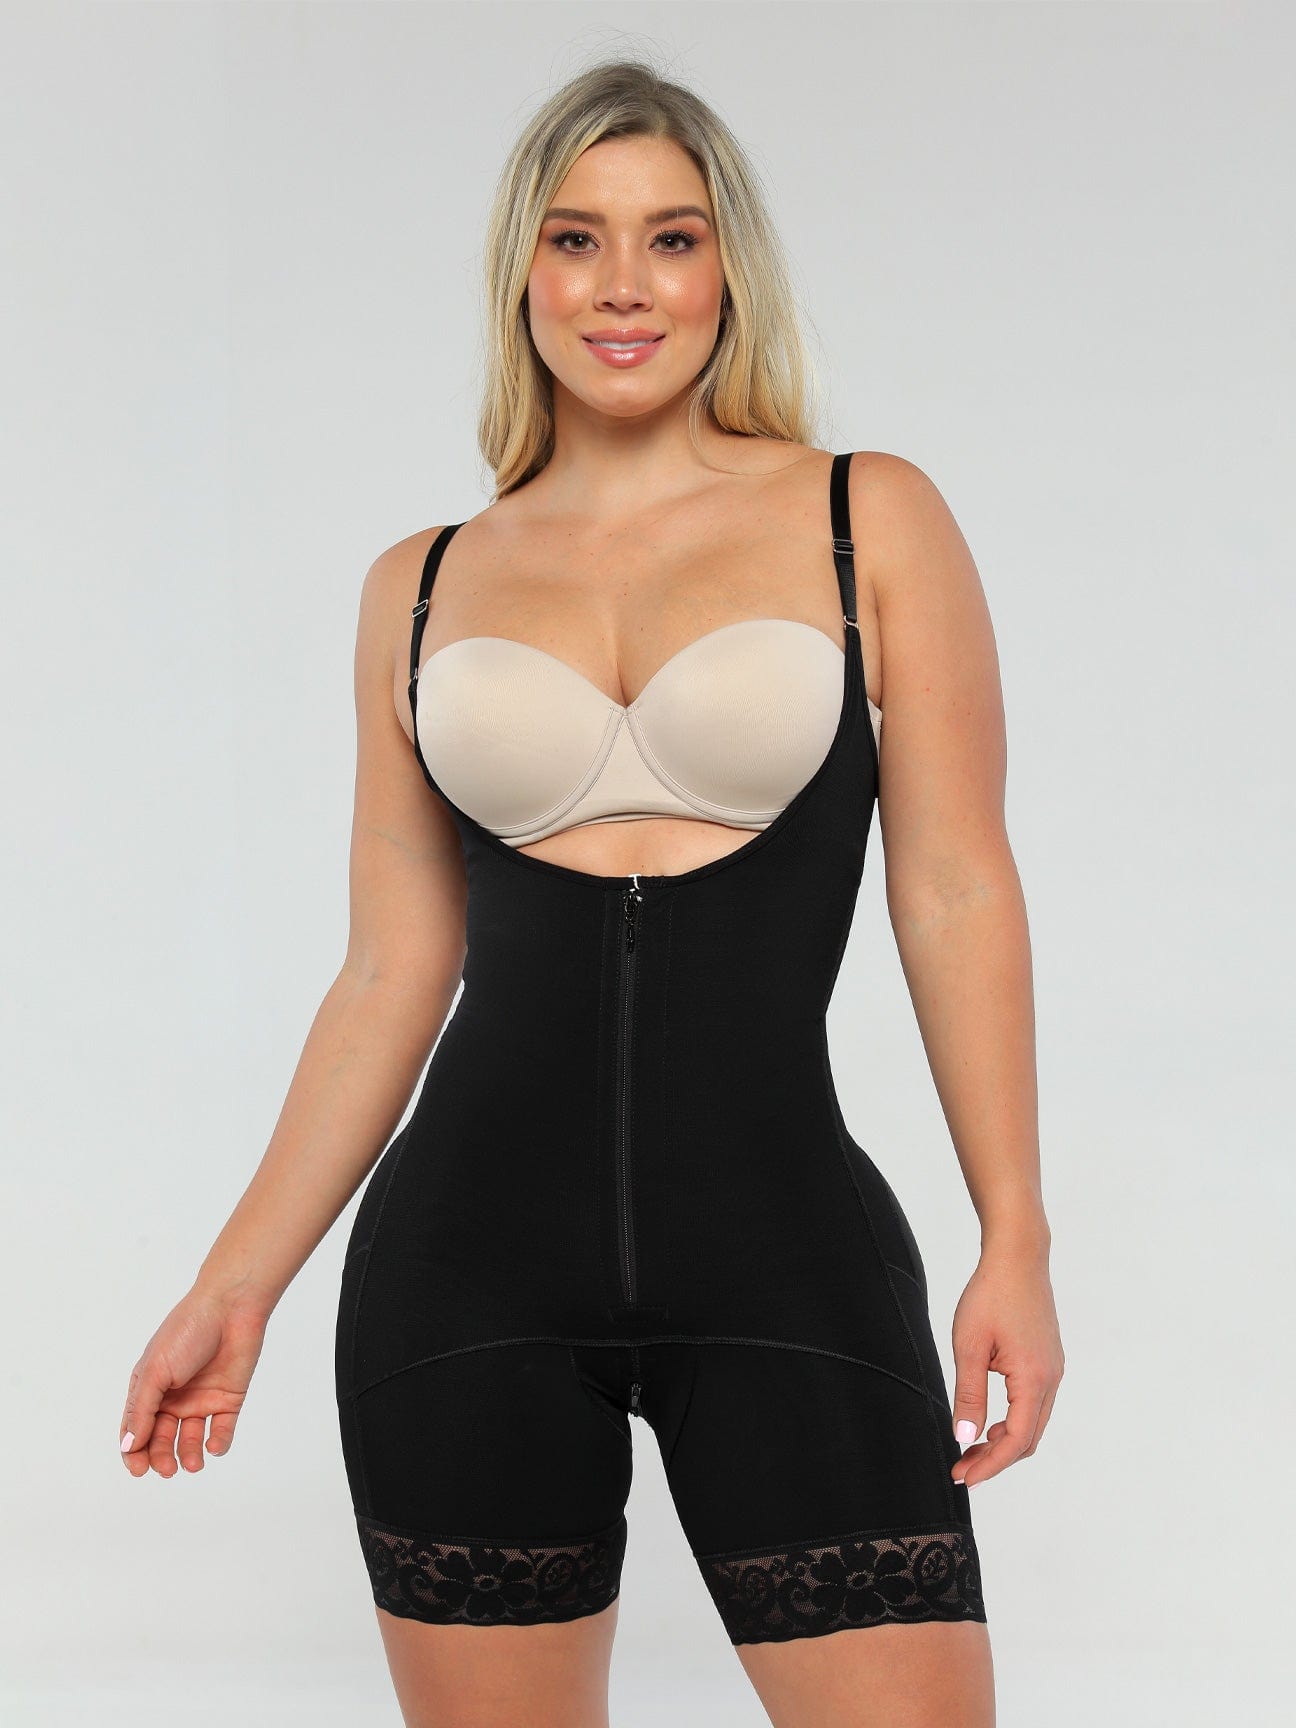 Maintain That Perfect Shape With Colombian Fajas, The Post-op Recovery  Garment That Makes Results Social Media Ready 📸📲👙 Snatched Body  Colombian Fajas are the doctor-recommended garment for those that